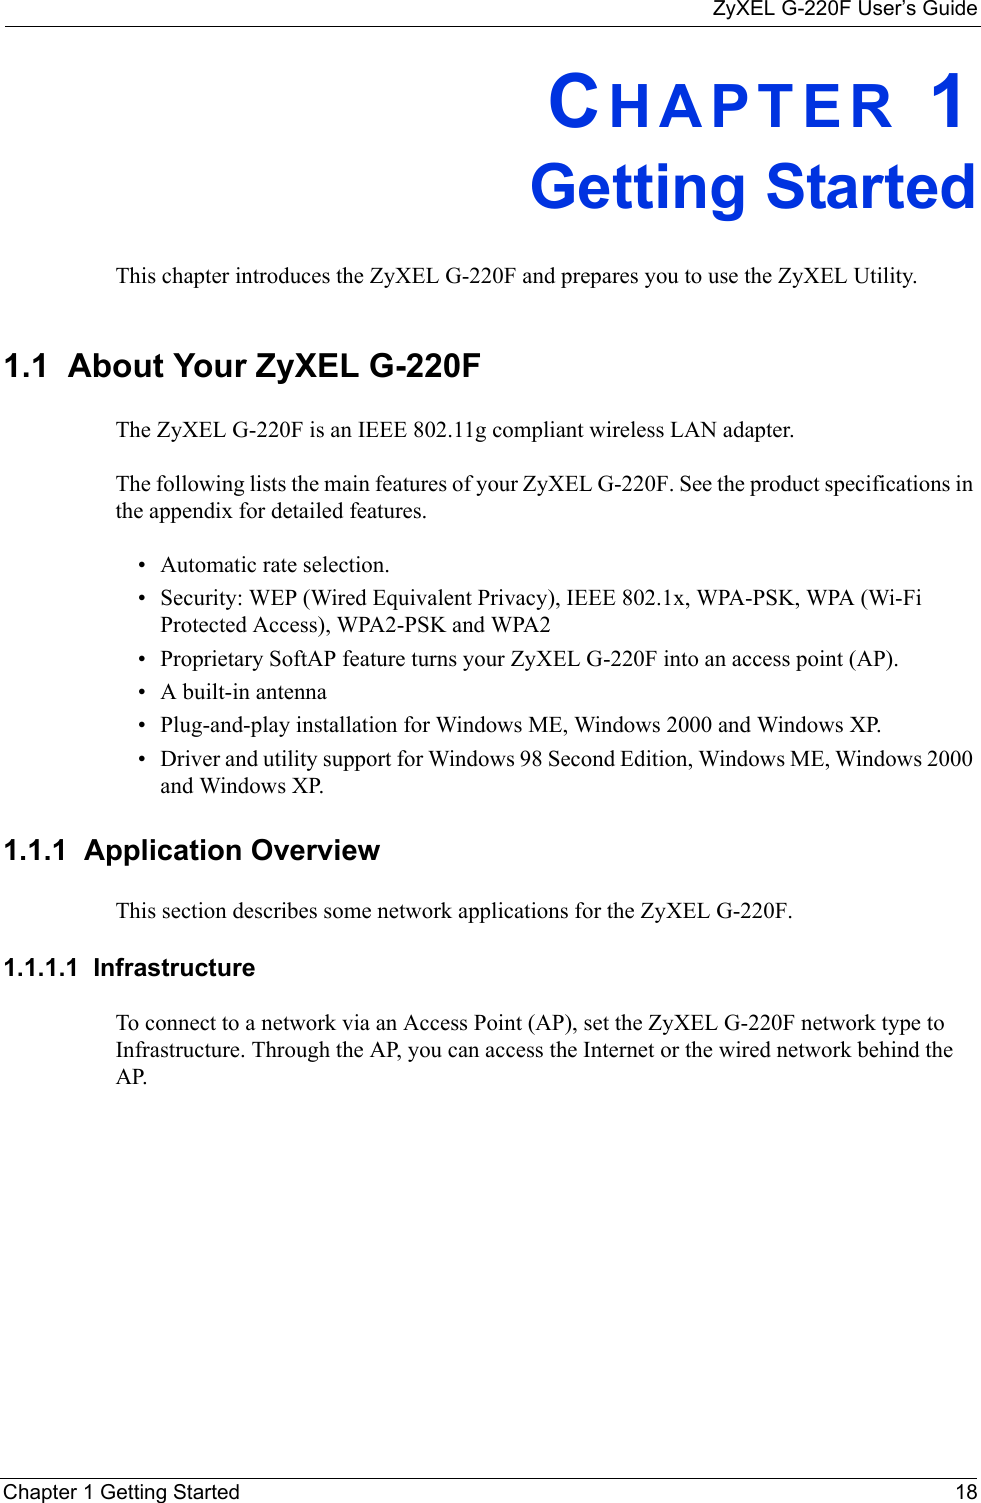 ZyXEL G-220F User’s GuideChapter 1 Getting Started 18CHAPTER 1Getting StartedThis chapter introduces the ZyXEL G-220F and prepares you to use the ZyXEL Utility.1.1  About Your ZyXEL G-220F    The ZyXEL G-220F is an IEEE 802.11g compliant wireless LAN adapter. The following lists the main features of your ZyXEL G-220F. See the product specifications in the appendix for detailed features.• Automatic rate selection.• Security: WEP (Wired Equivalent Privacy), IEEE 802.1x, WPA-PSK, WPA (Wi-Fi Protected Access), WPA2-PSK and WPA2 • Proprietary SoftAP feature turns your ZyXEL G-220F into an access point (AP).• A built-in antenna• Plug-and-play installation for Windows ME, Windows 2000 and Windows XP.• Driver and utility support for Windows 98 Second Edition, Windows ME, Windows 2000 and Windows XP.1.1.1  Application OverviewThis section describes some network applications for the ZyXEL G-220F. 1.1.1.1  Infrastructure To connect to a network via an Access Point (AP), set the ZyXEL G-220F network type to Infrastructure. Through the AP, you can access the Internet or the wired network behind the AP.  